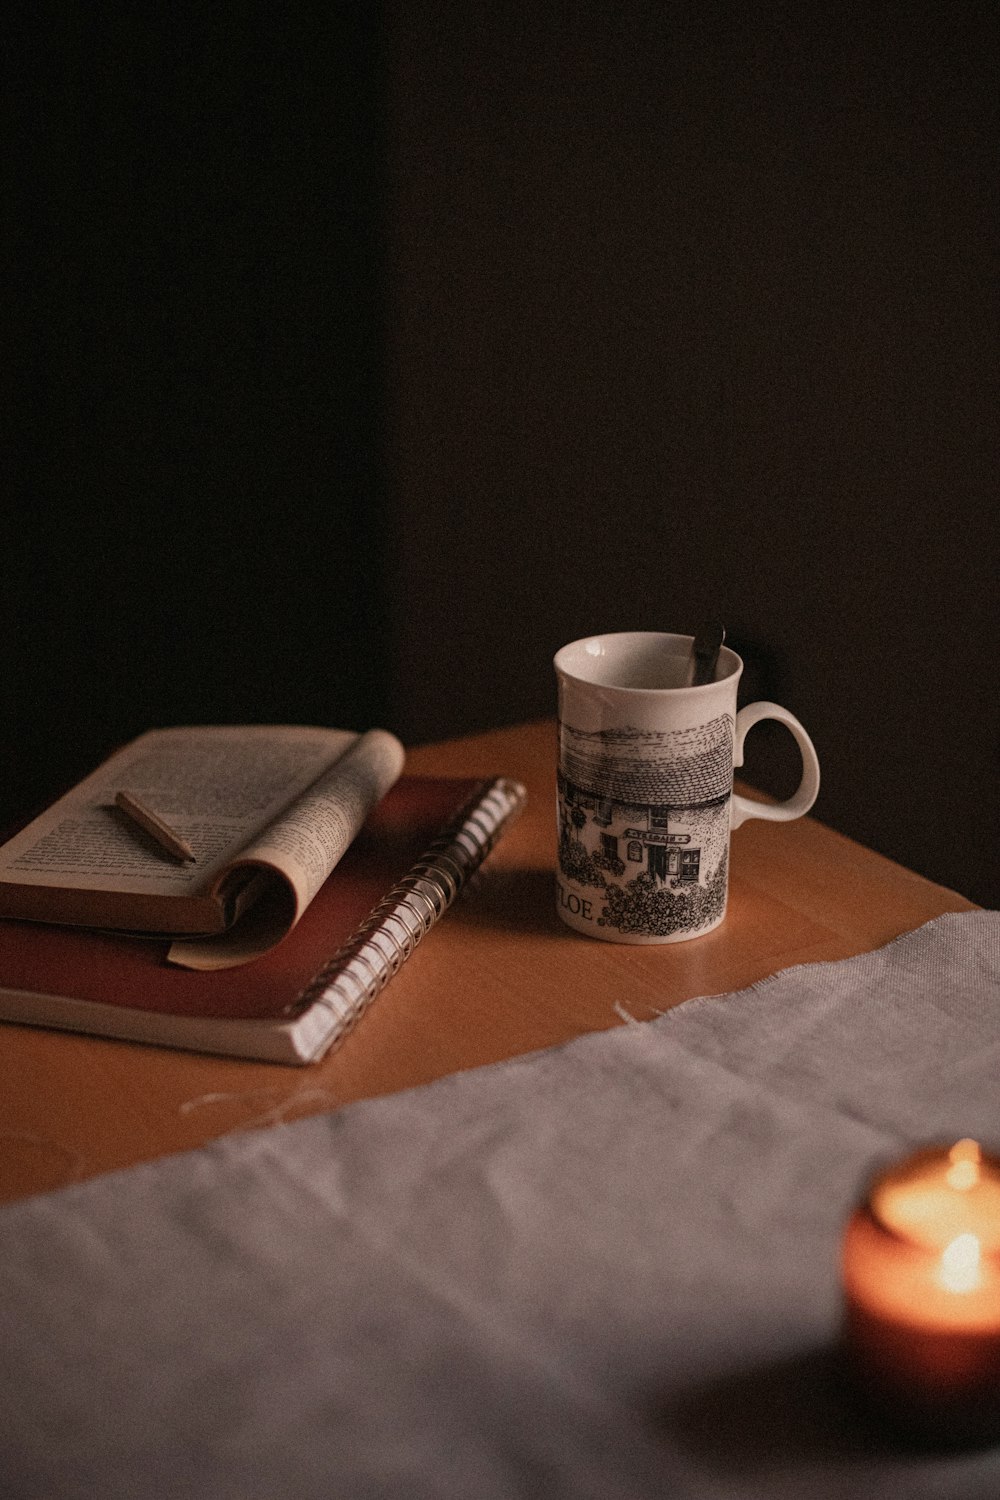 a candle and a mug on a table